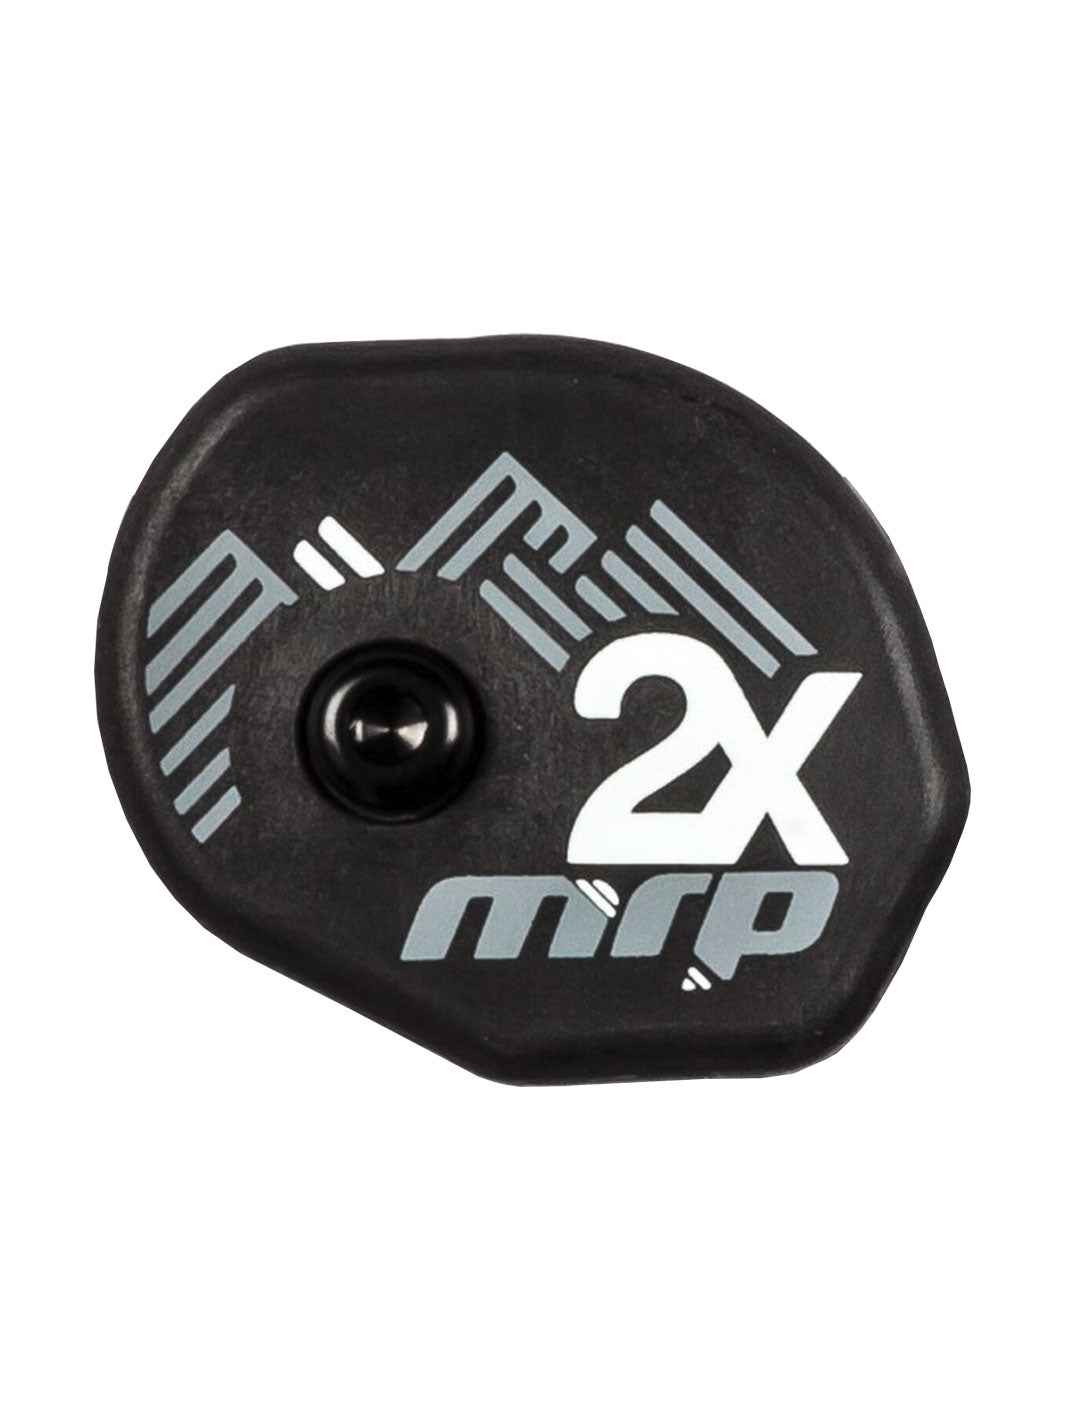 2x Lower Guide Cover